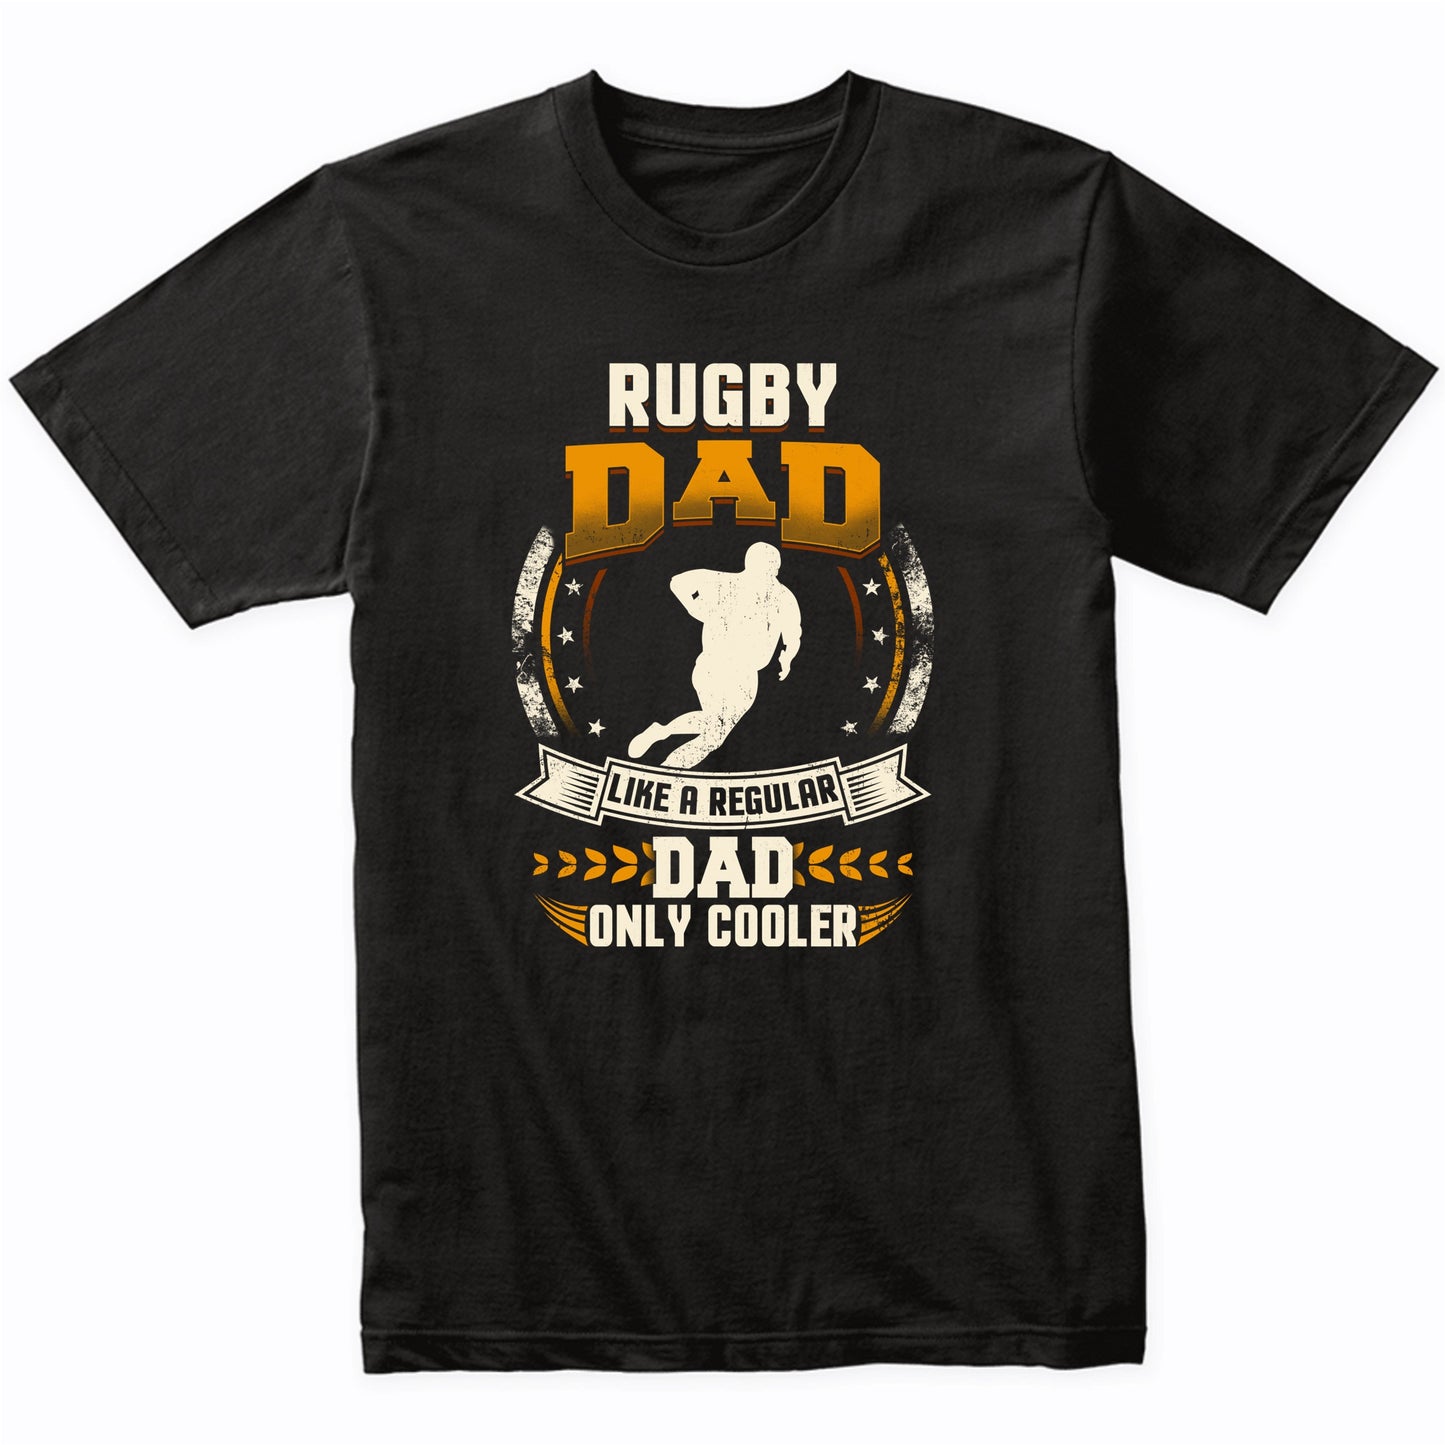 Rugby Dad Like A Regular Dad Only Cooler Funny T-Shirt